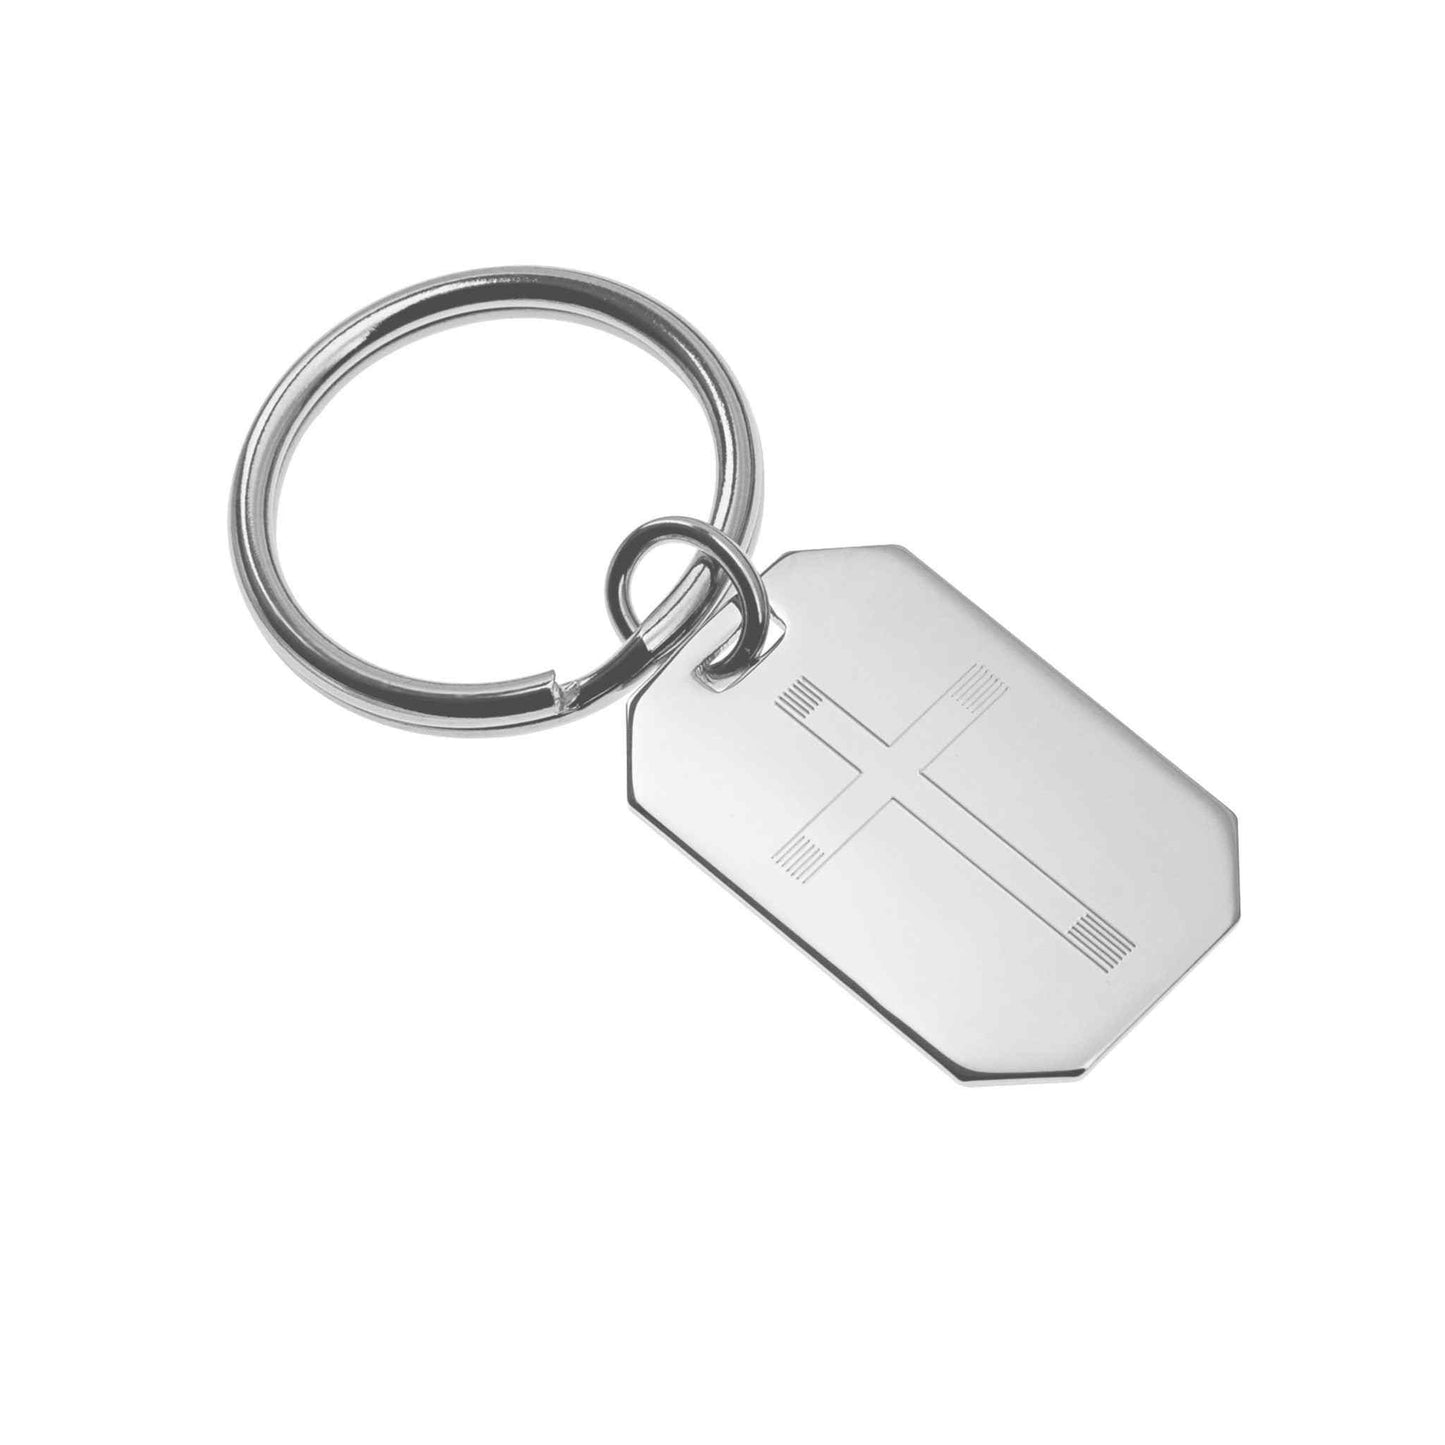 A cross key ring displayed on a neutral white background.